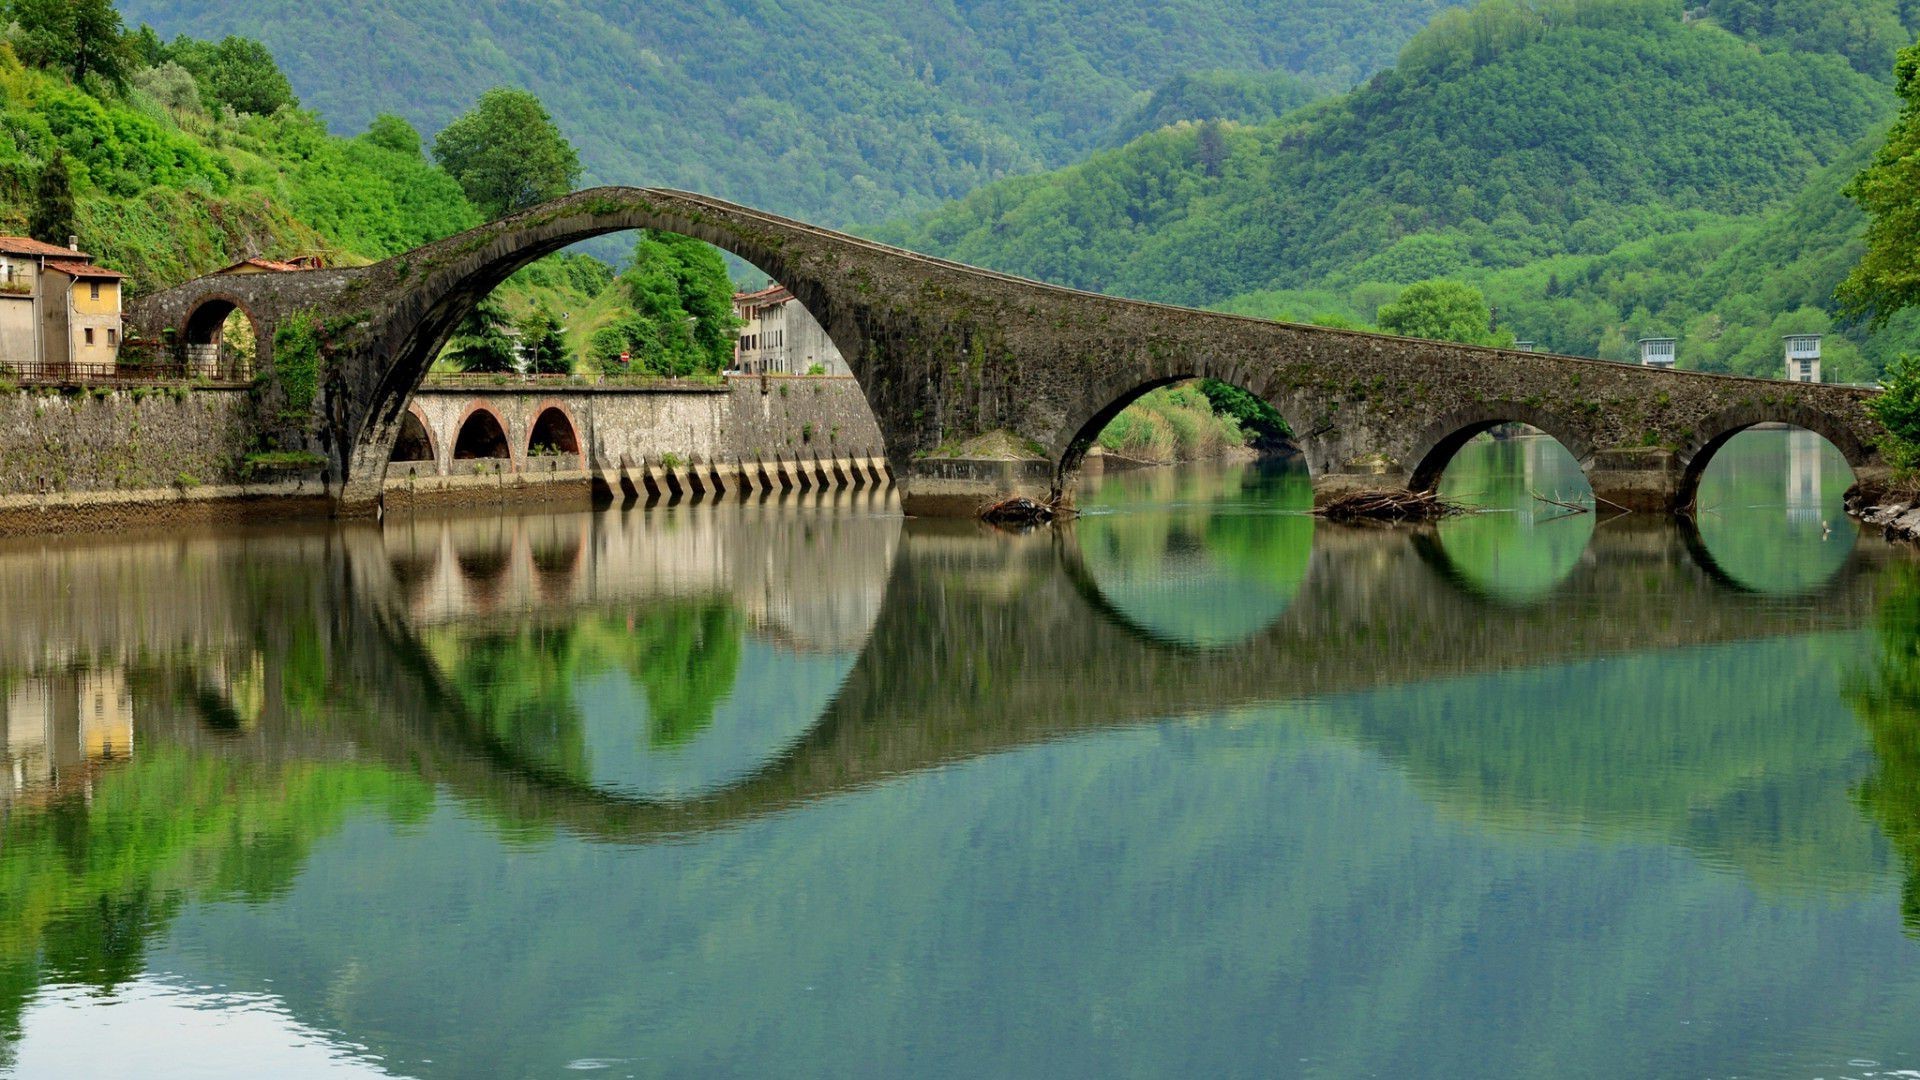 nature, Landscape, Architecture, Italy, Bridge, Old Bridge, Arch, Trees, Forest, Hills, Old Building, Water, Lake, Reflection Wallpaper